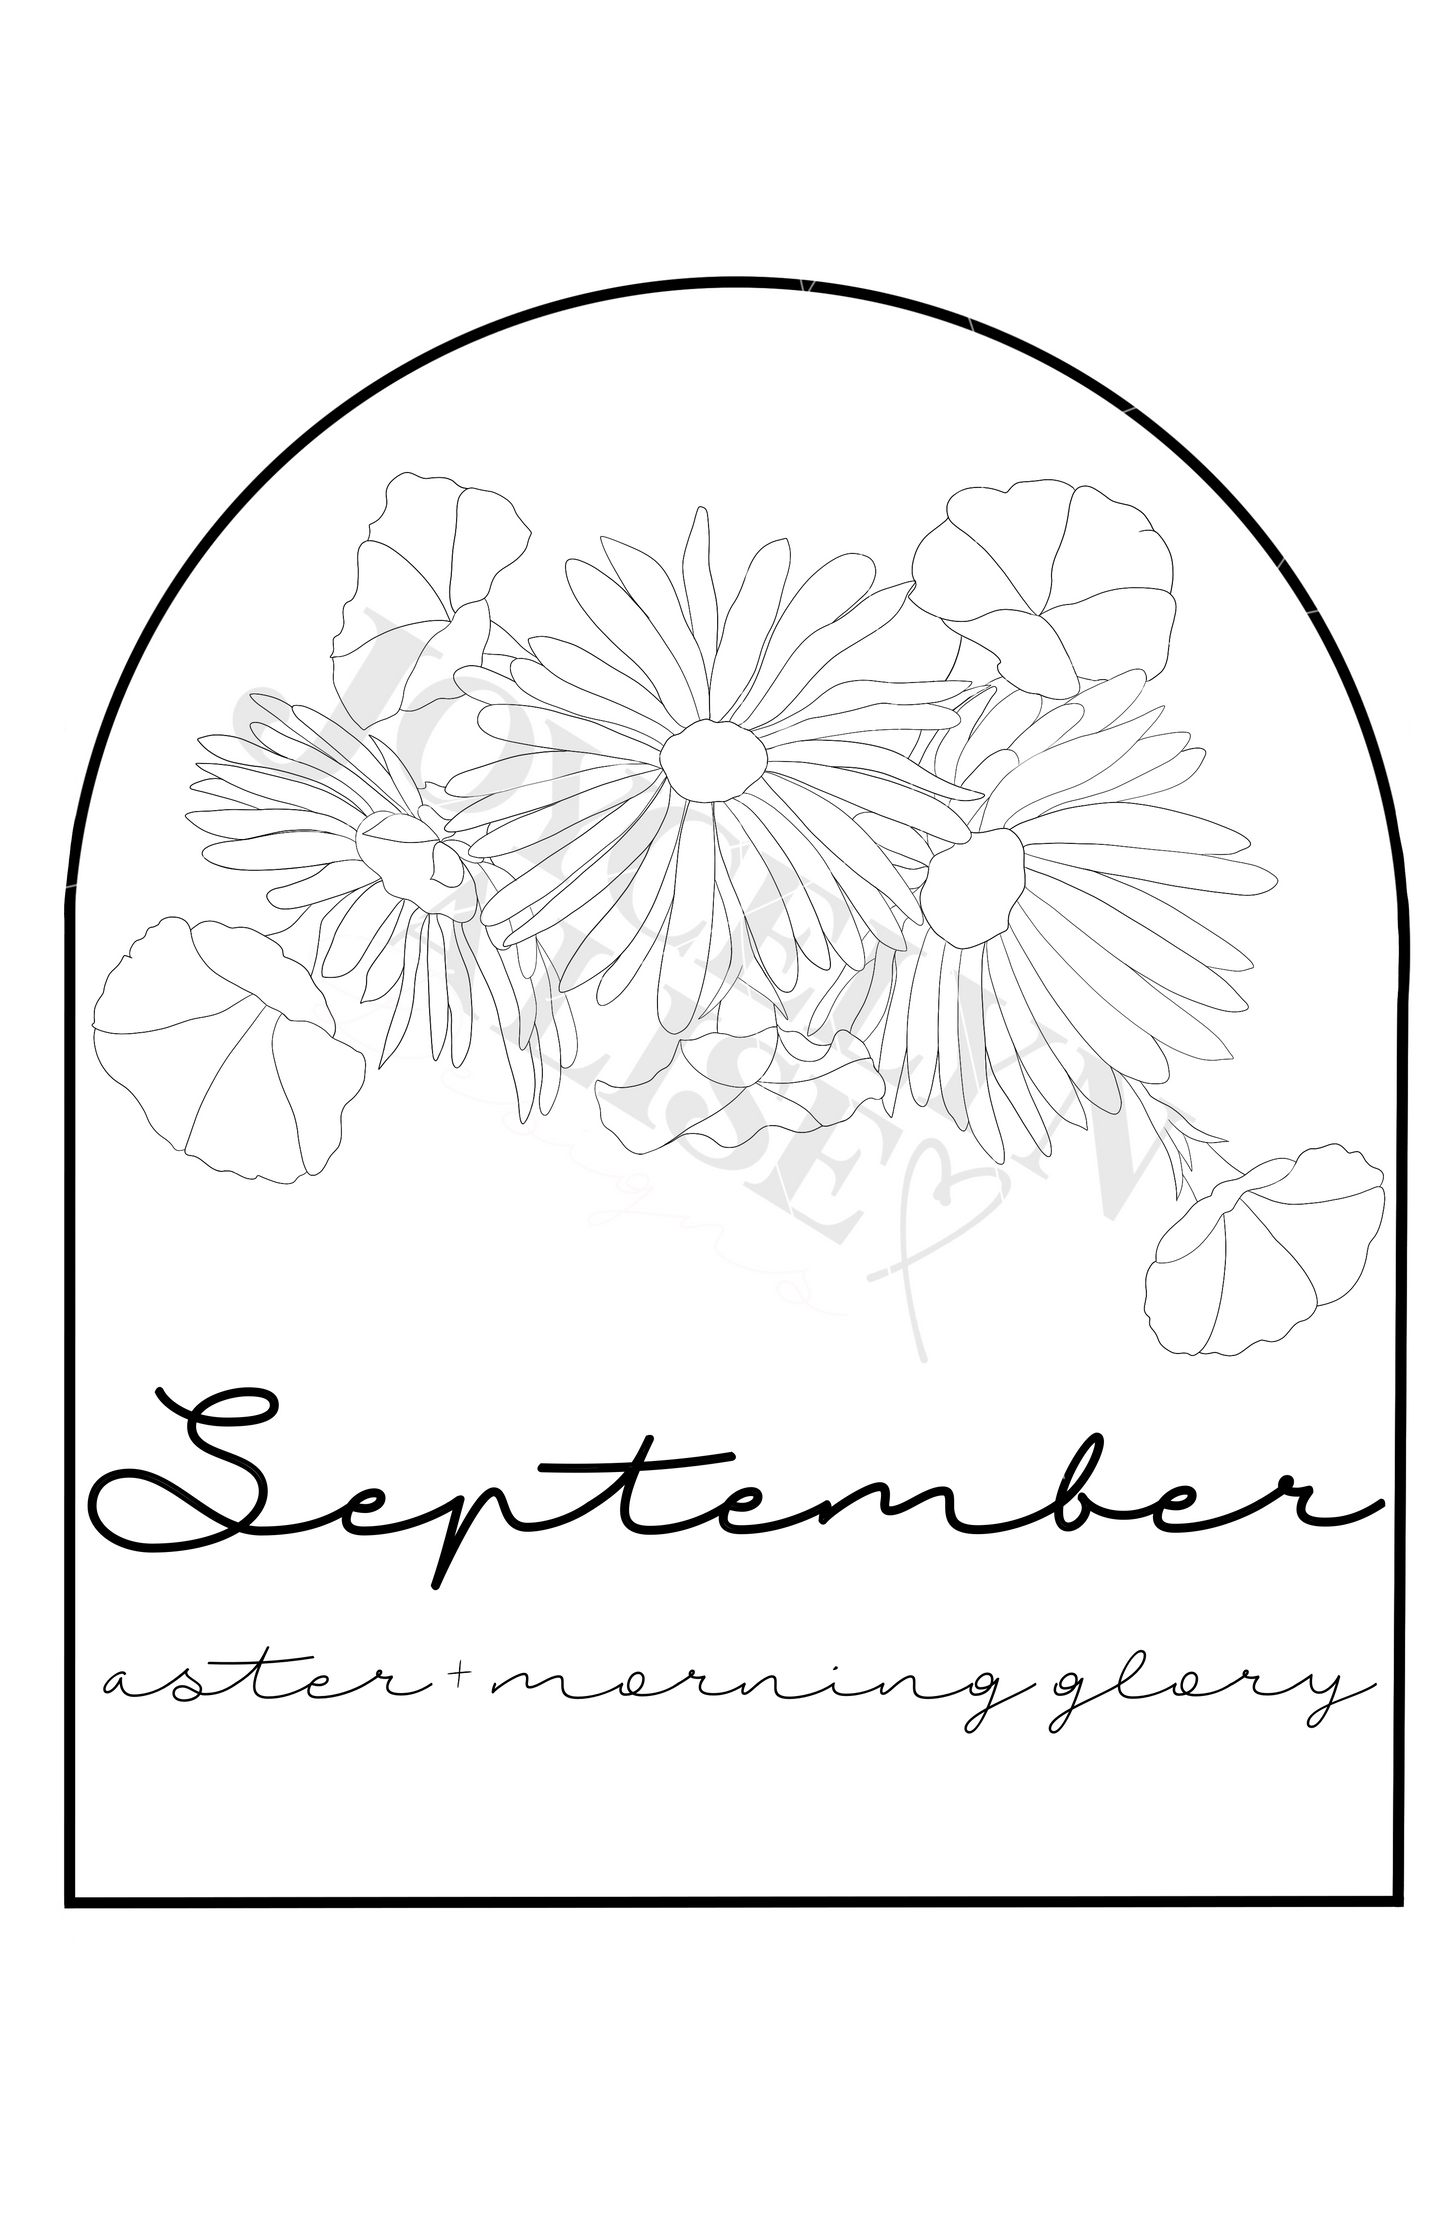 September asters + morning glory scroll saw template